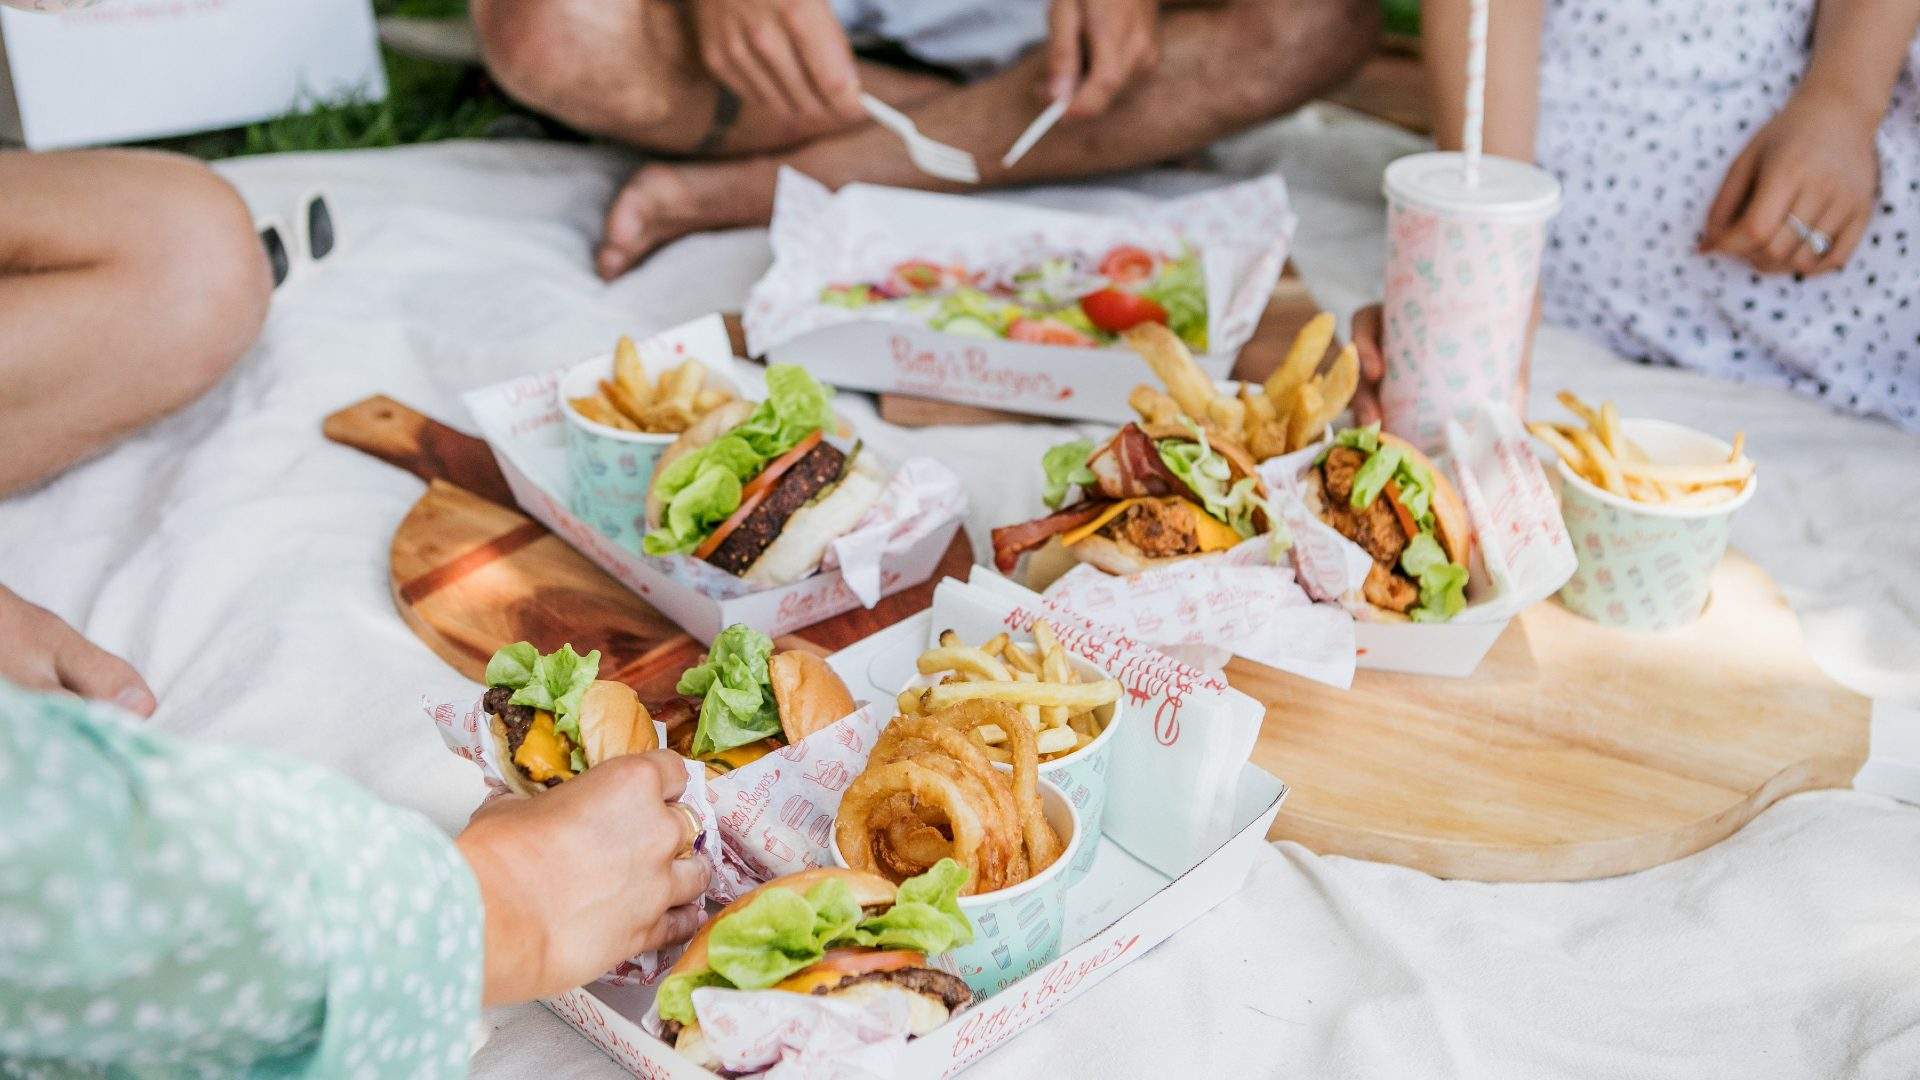 We're Giving Away an Epic Burger Picnic for You and Your Besties